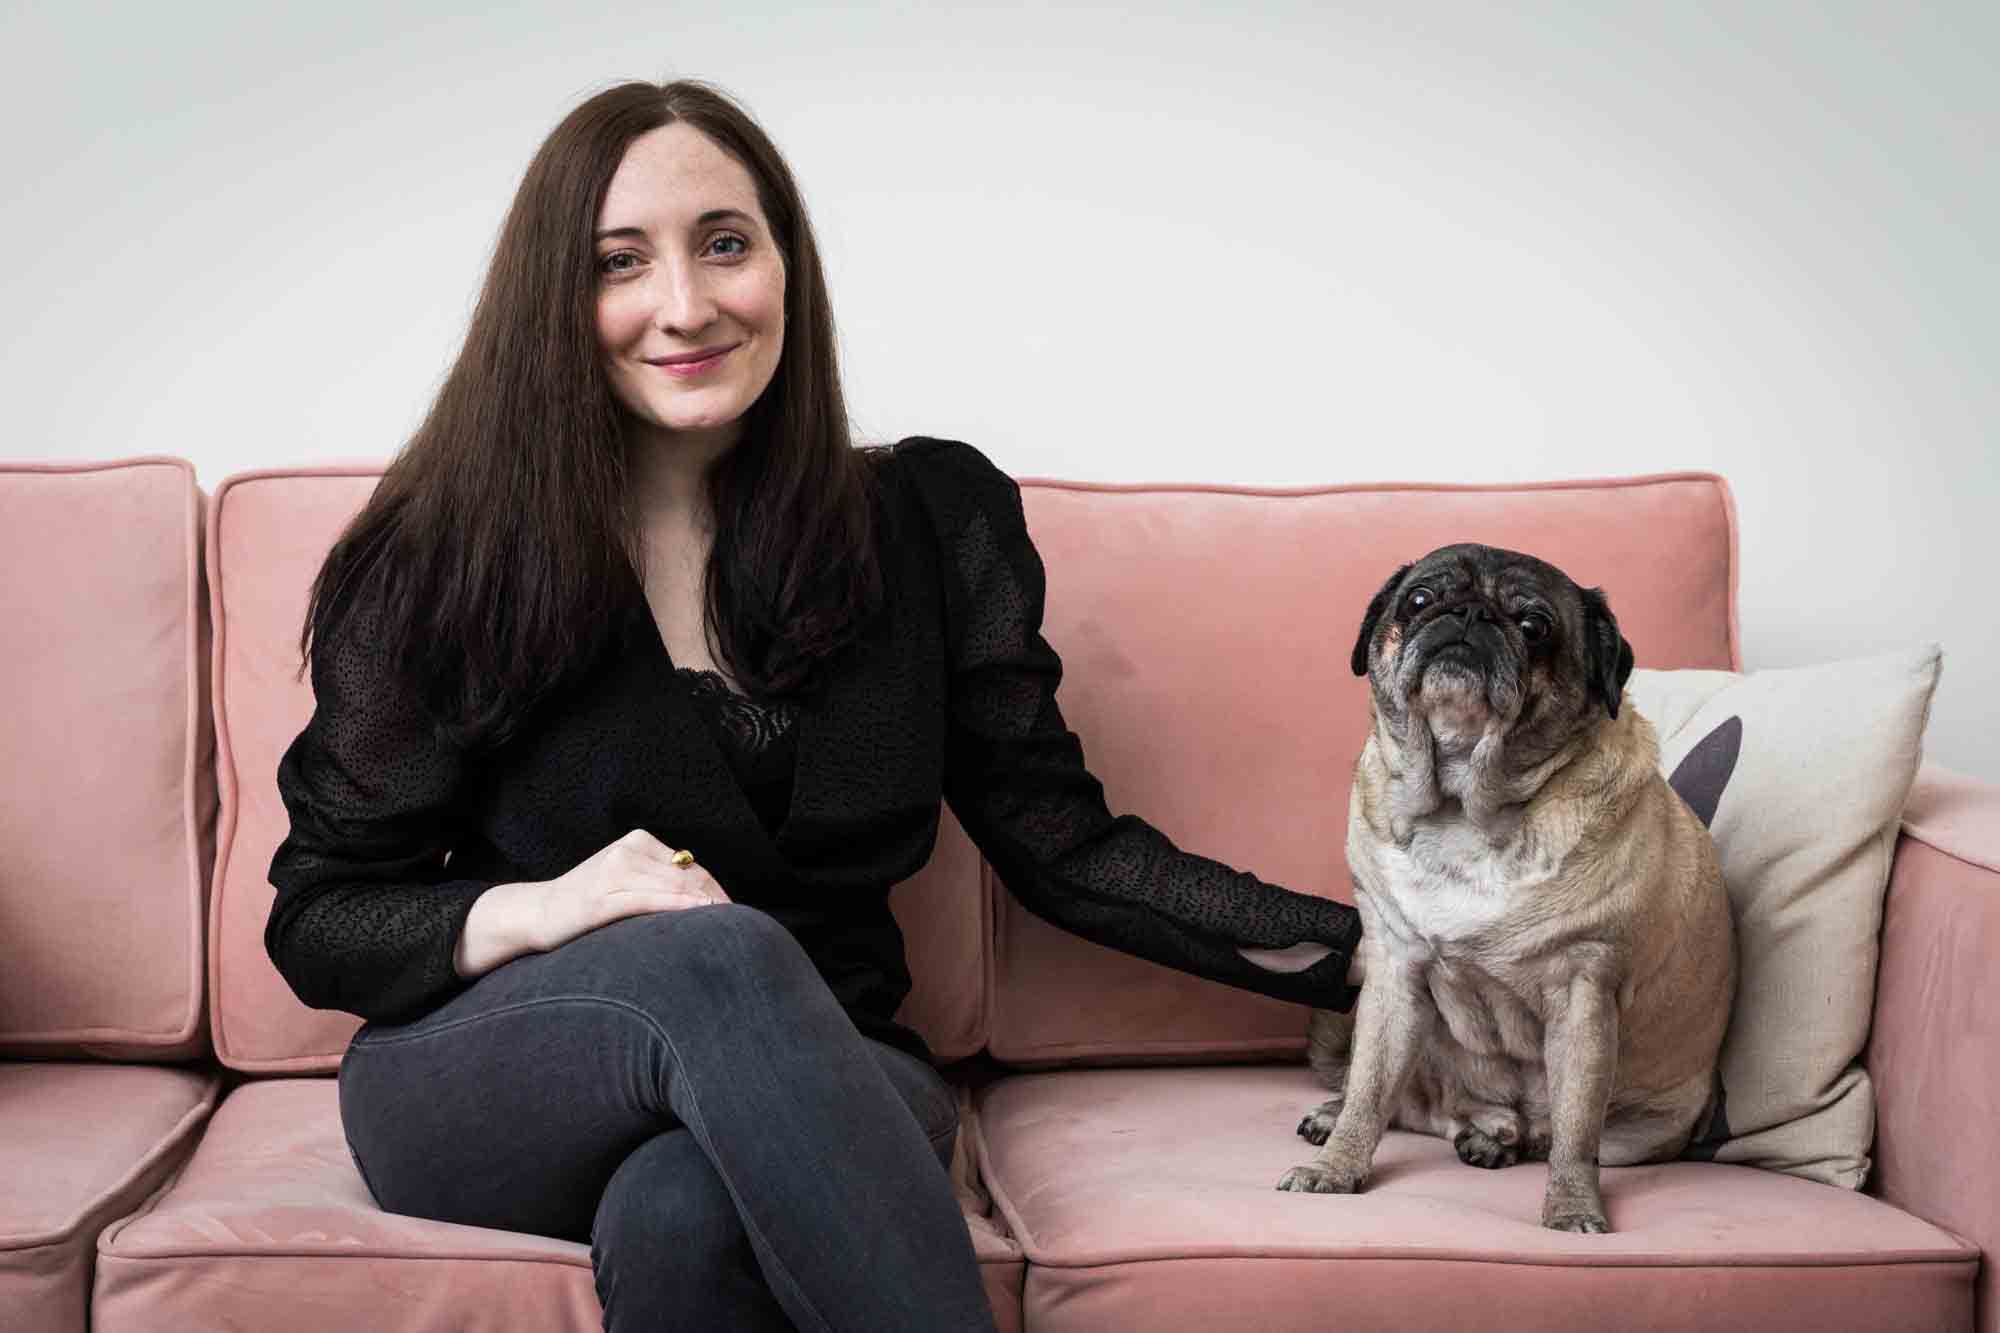 Author Jiordan Castle sitting on pink couch with pug dog